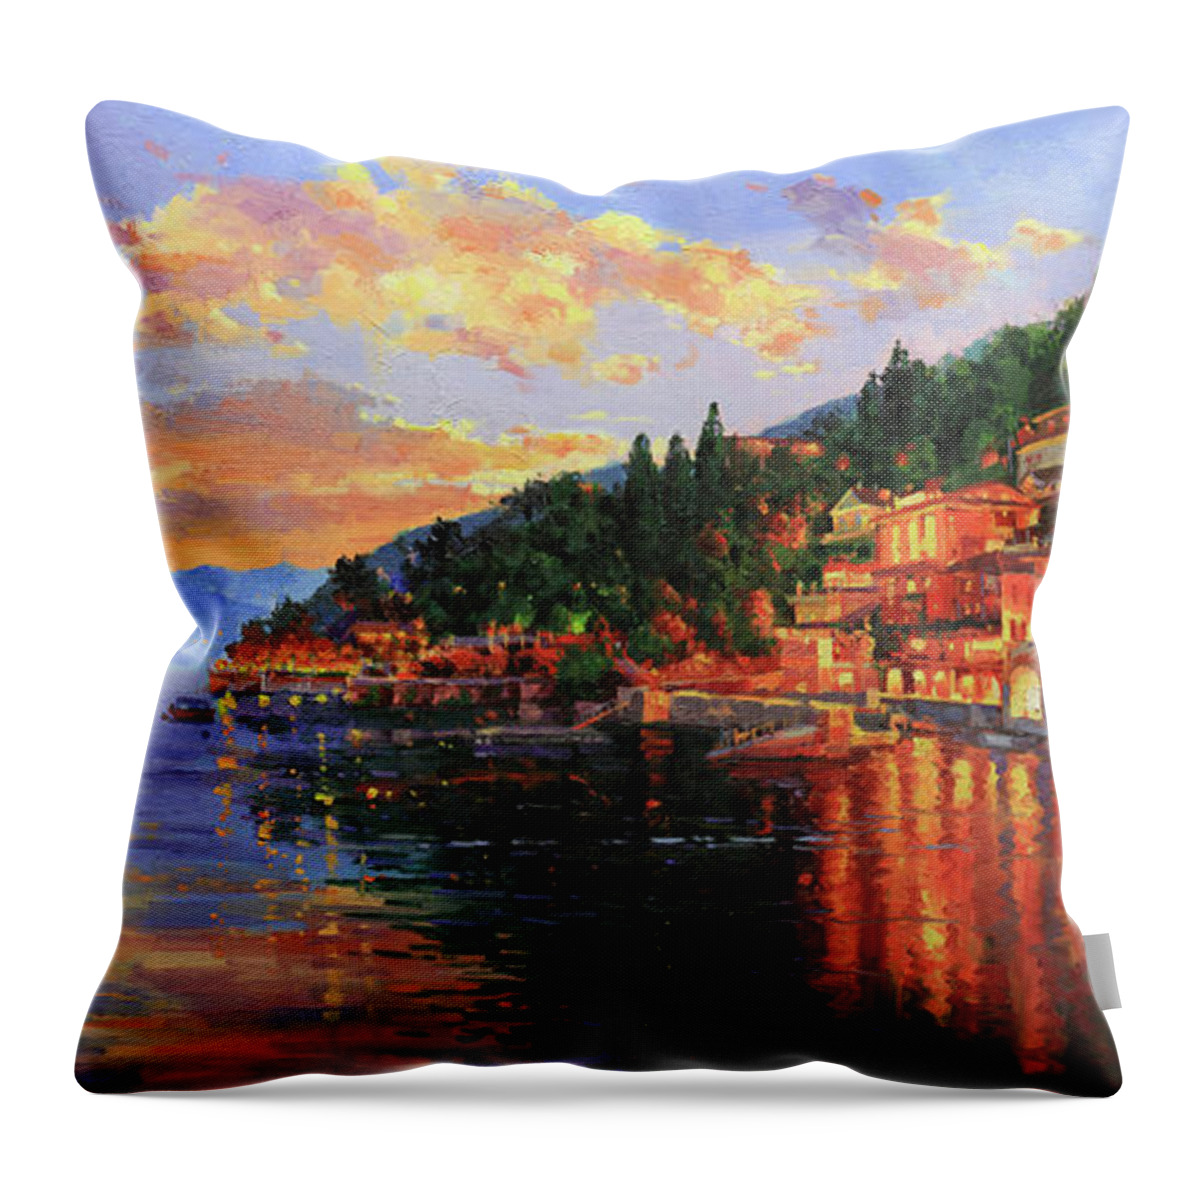 Italy Lake Como Bellagio Sunset Lake Lakecomo Sunset Dusk Sky Clouds Village Water Photographs Lake Como Original Italy Oil Painting Bellagio Sunset Lake Alps Lago Como Sky Clouds Buildings City Town Village Water Wall Art Framed Prints Old Village Paintings Landscape Cityscape Scenic Romantic Tuscany Oil Landscape Poppy Olive Village Chianti Wall Art Posters Tuscany Old Village Paintings Landscape Cityscape Scenic Romantic Europe European Artist Gary Kim Canvas Original Oil Painting Art Throw Pillow featuring the painting Lake Como Sunset by Gary Kim